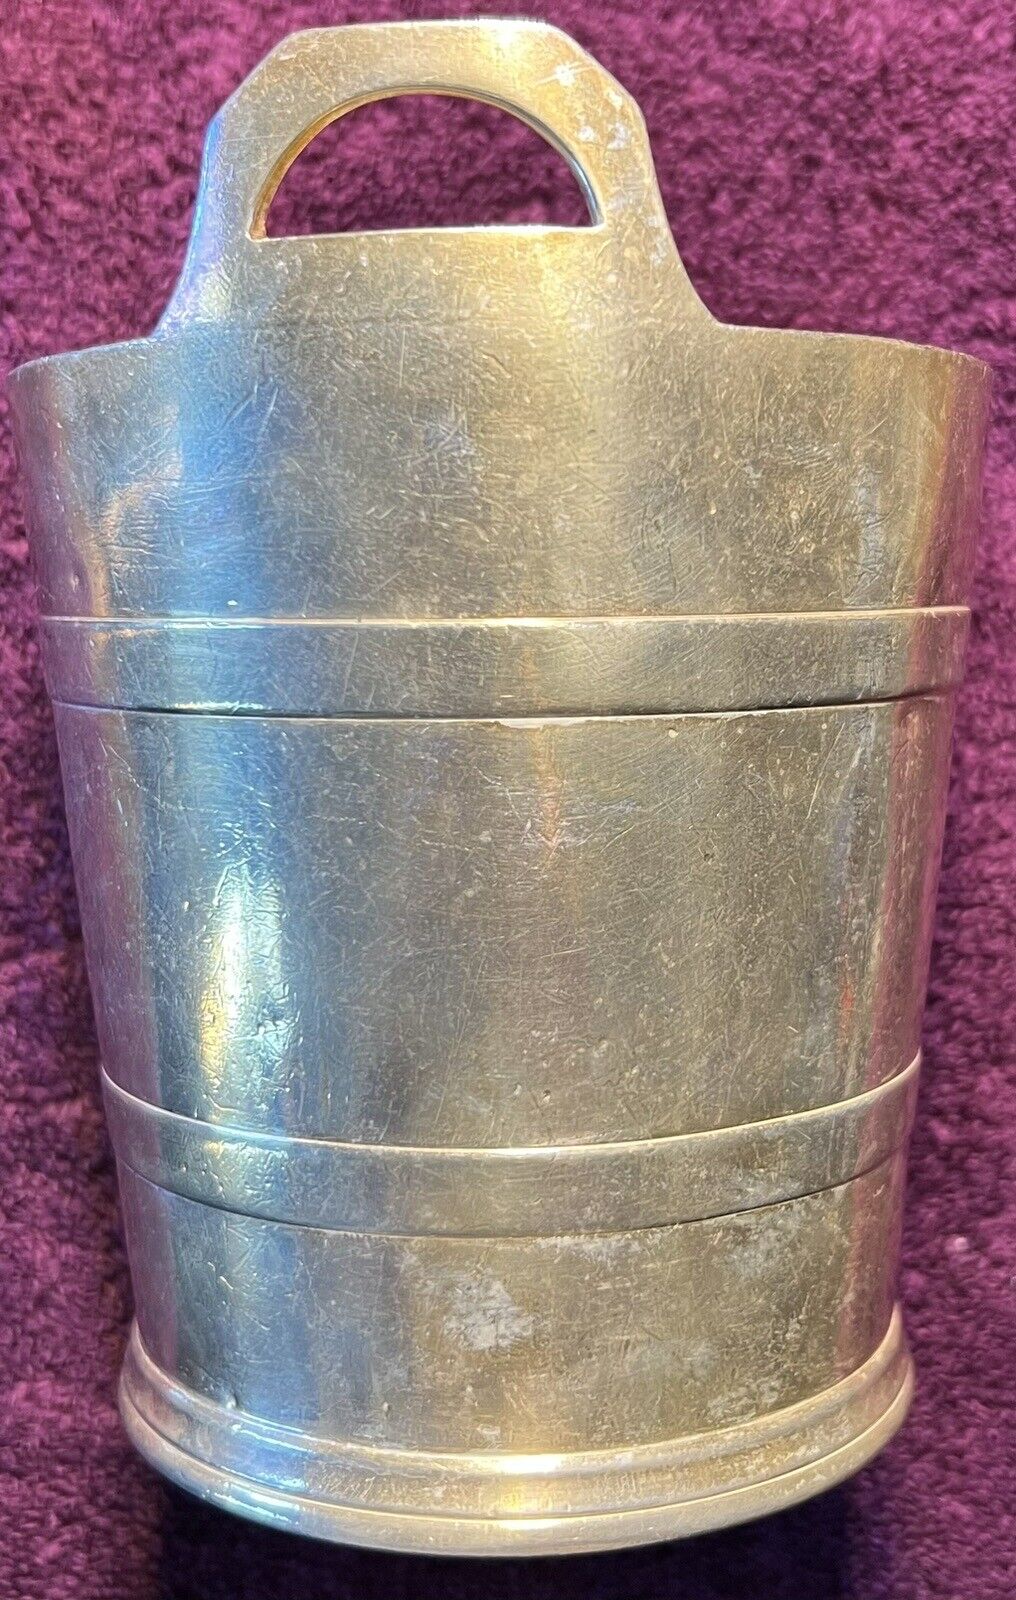 1948 Cunard White Star Lines Silver Plated Ice Bucket From QE or QM - RARE